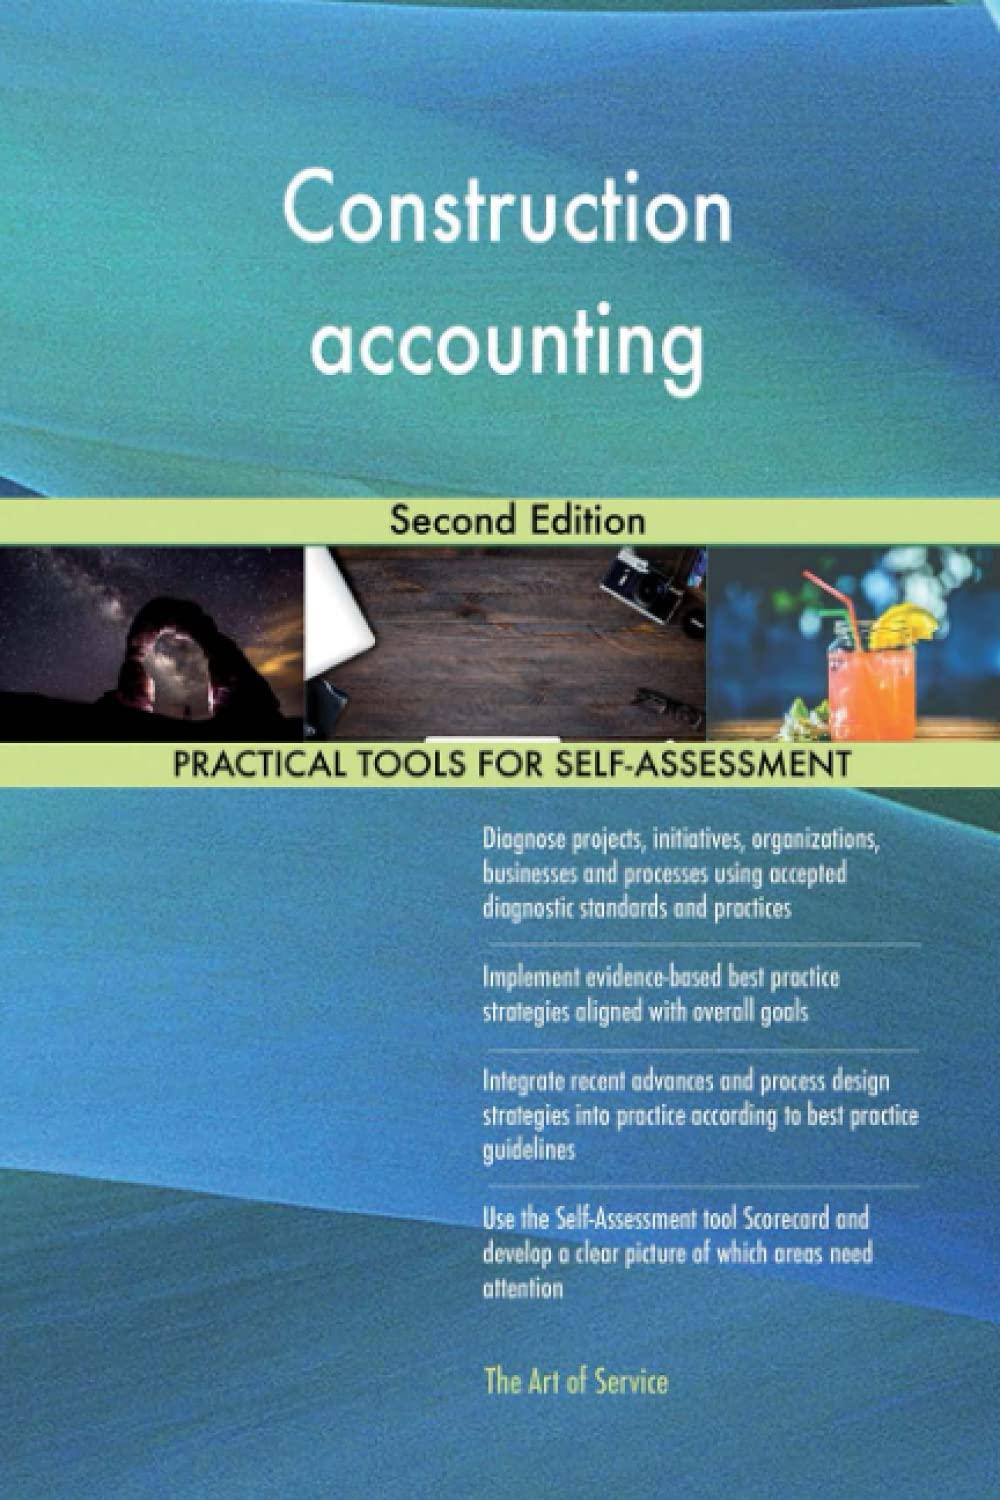 construction accounting 2nd edition gerardus blokdyk 0655316019, 978-0655316015